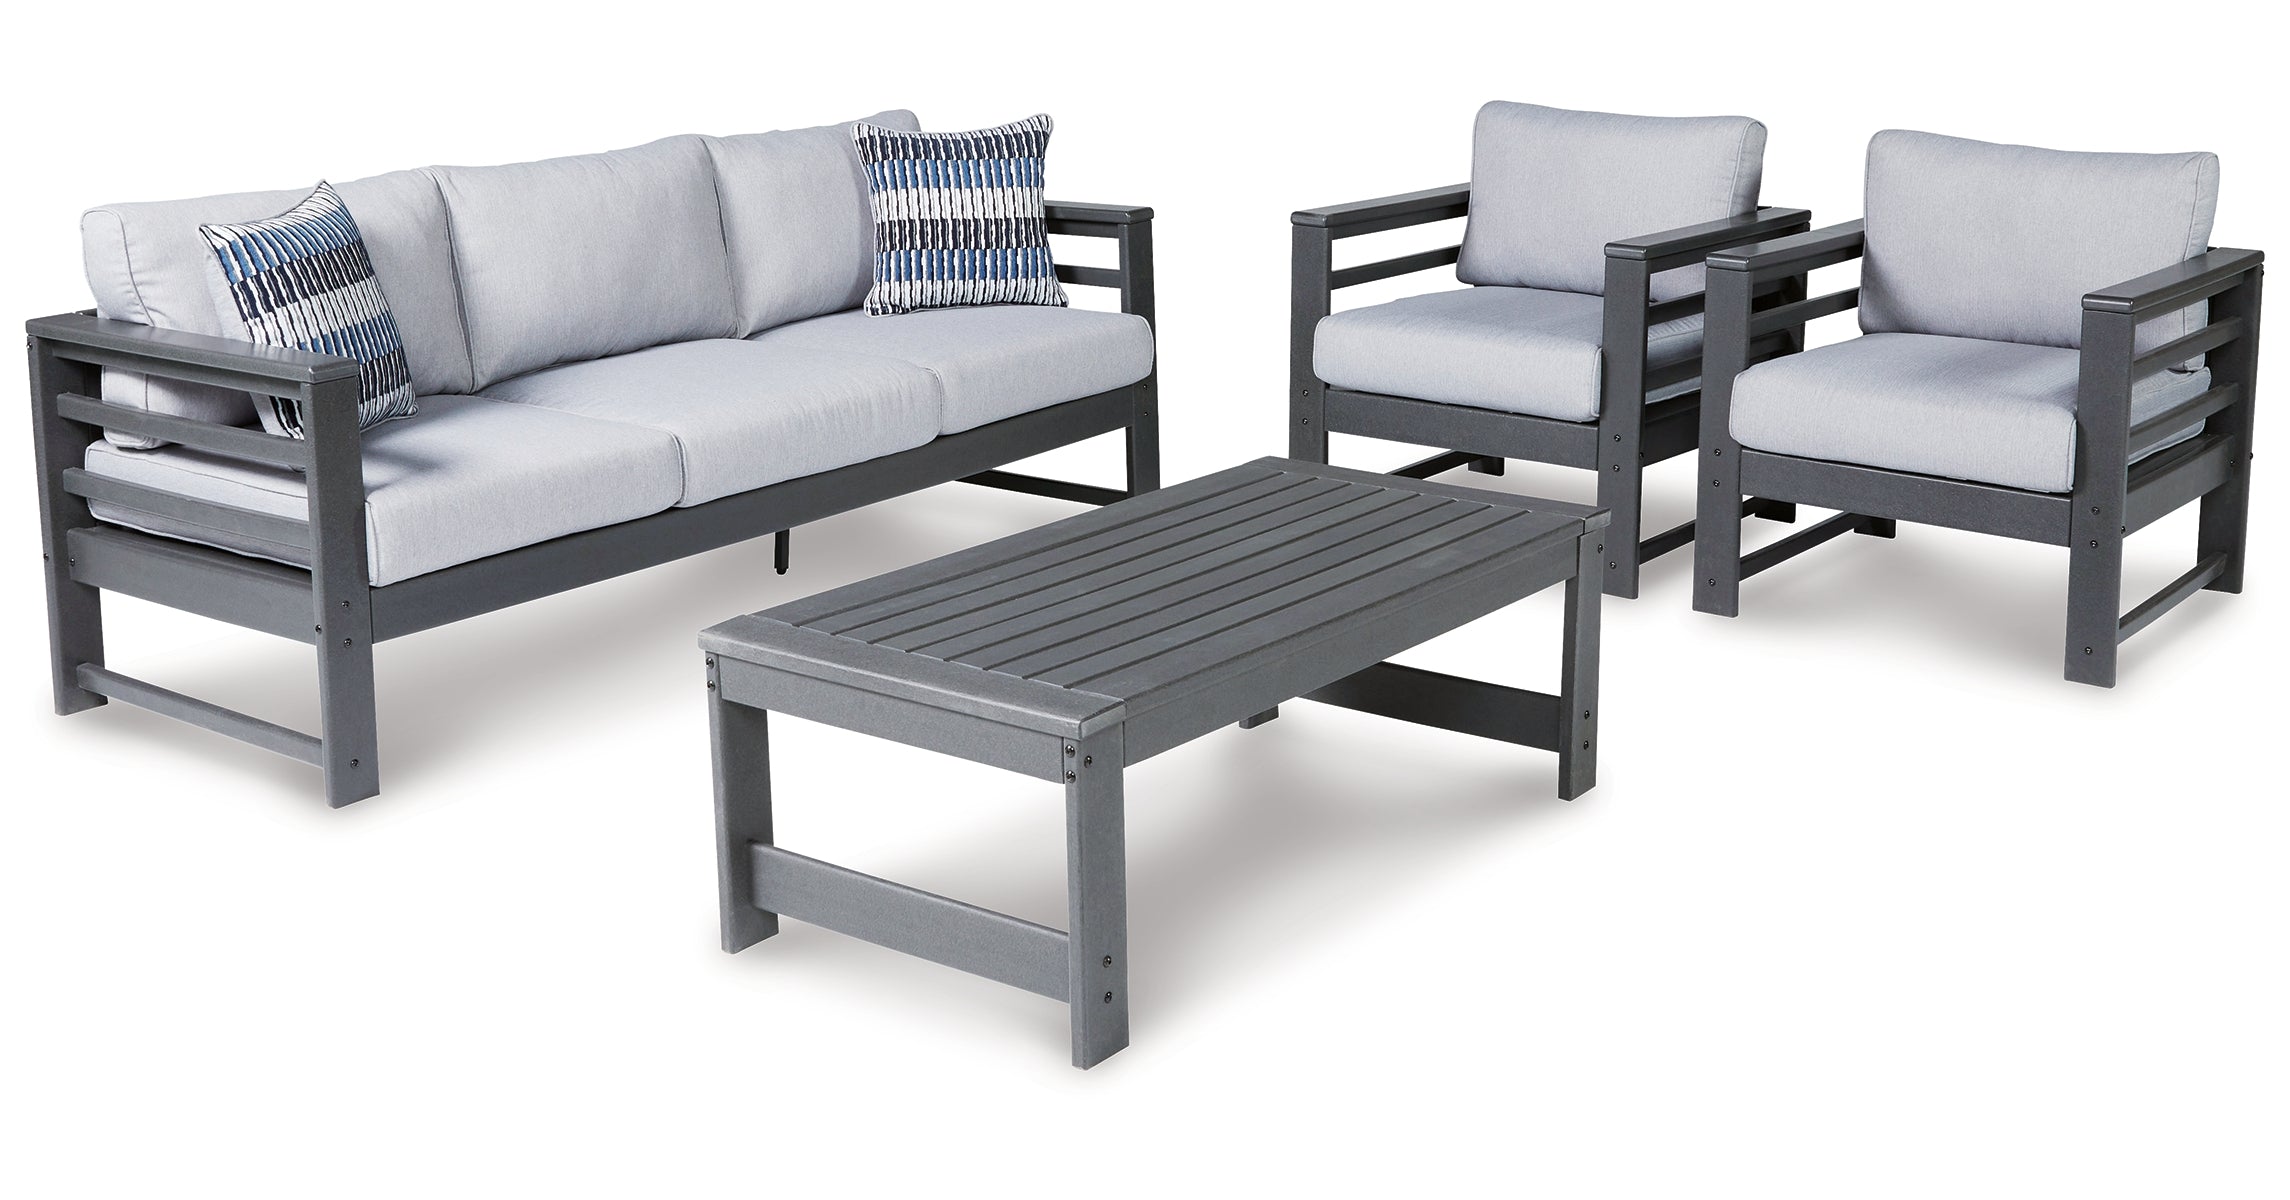 Amora Outdoor Sofa and 2 Chairs with Coffee Table